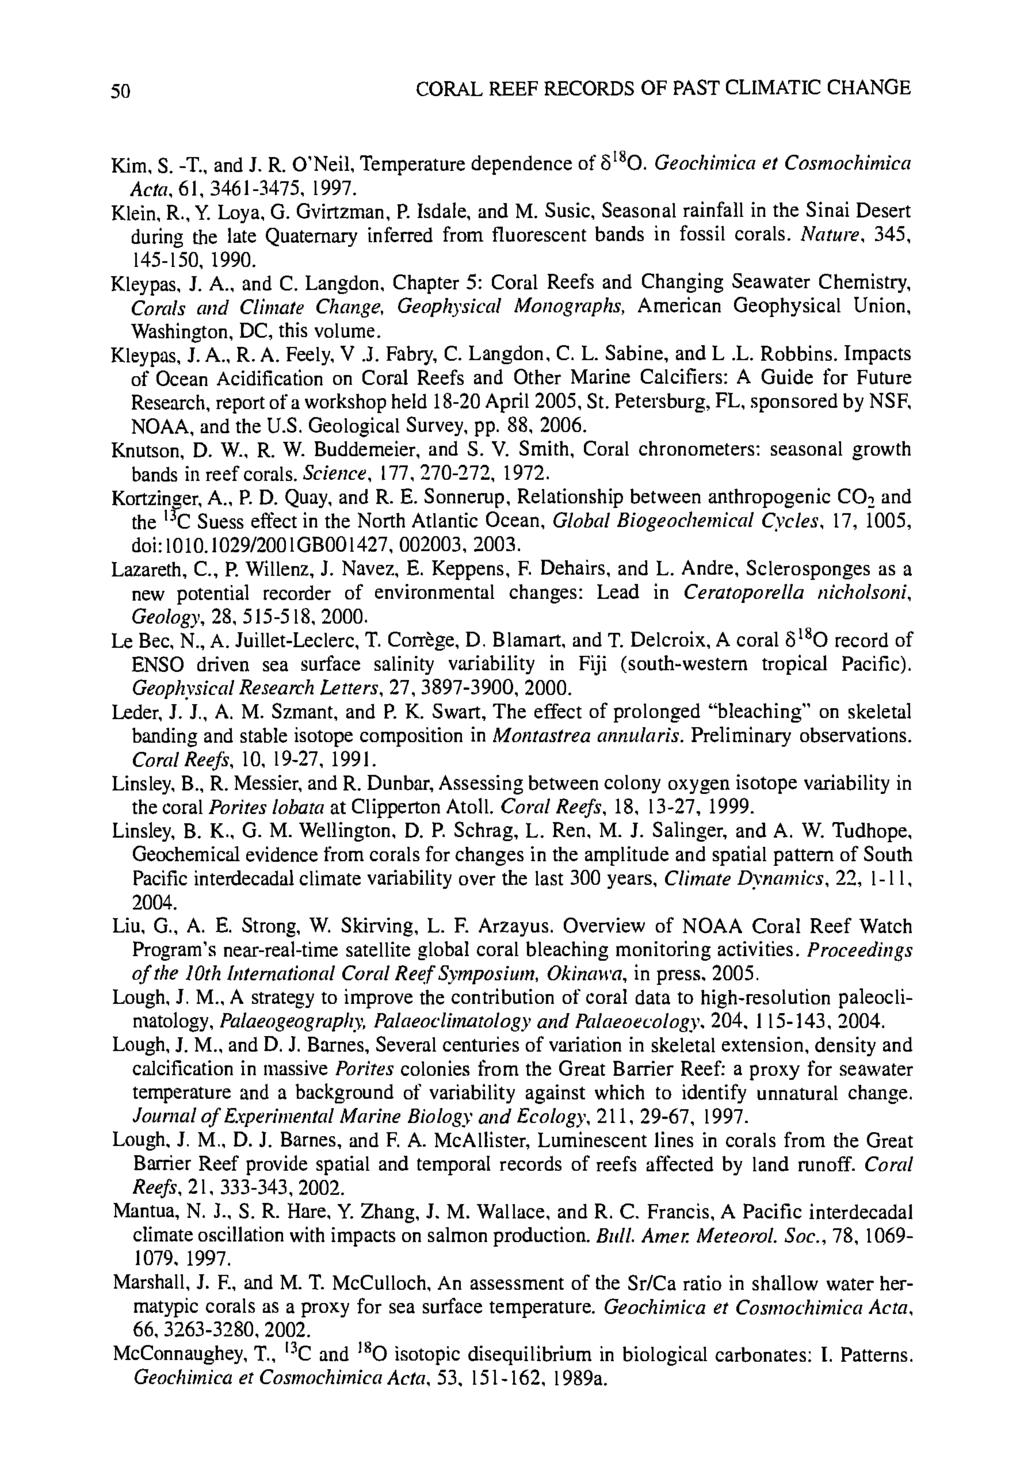 50 CORAL REEF RECORDS OF PAST CLIMATIC CHANGE Kim, S. -T., and J. R. O'Neil, Temperature dependence of 3180. Geochimica et Cosmochimica Acta, 61,3461-3475, 1997. Klein, R., Y. Loya, G. Gvirtzman, P.